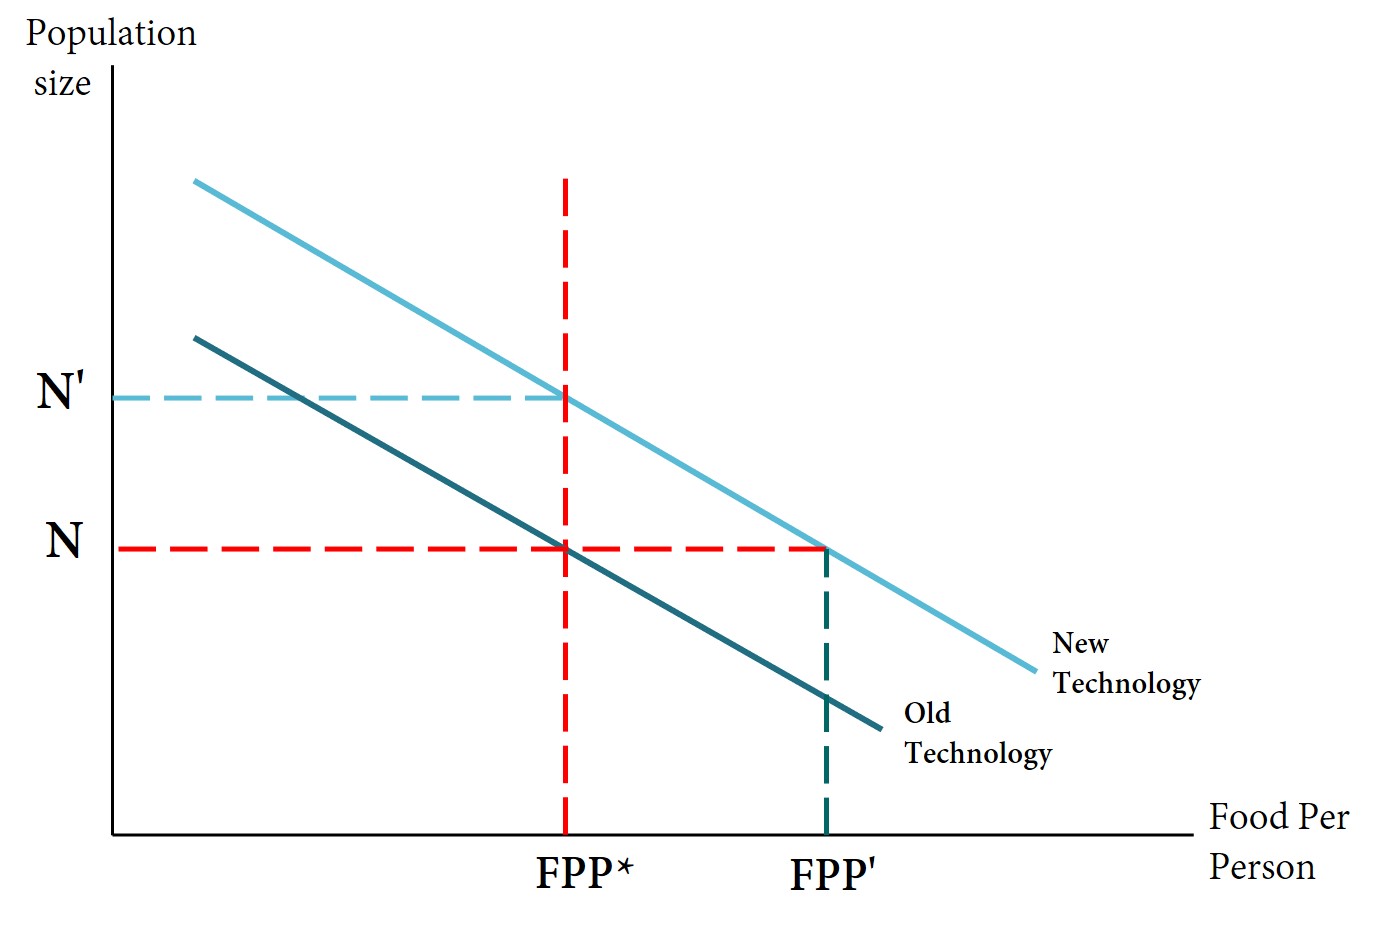 Here population size is on the vertical axis, with food per person on the horizontal axis as usual. There is a downward-sloping line labeled "Old technology". Above it is a parallel line labeled "New technology". FPP*, the equilibrium level of food per person, intersects the Old Technology line at N and the New Technology line at N' (which is higher than N). N intersects the New Technology line at FPP', which is higher than FPP*.